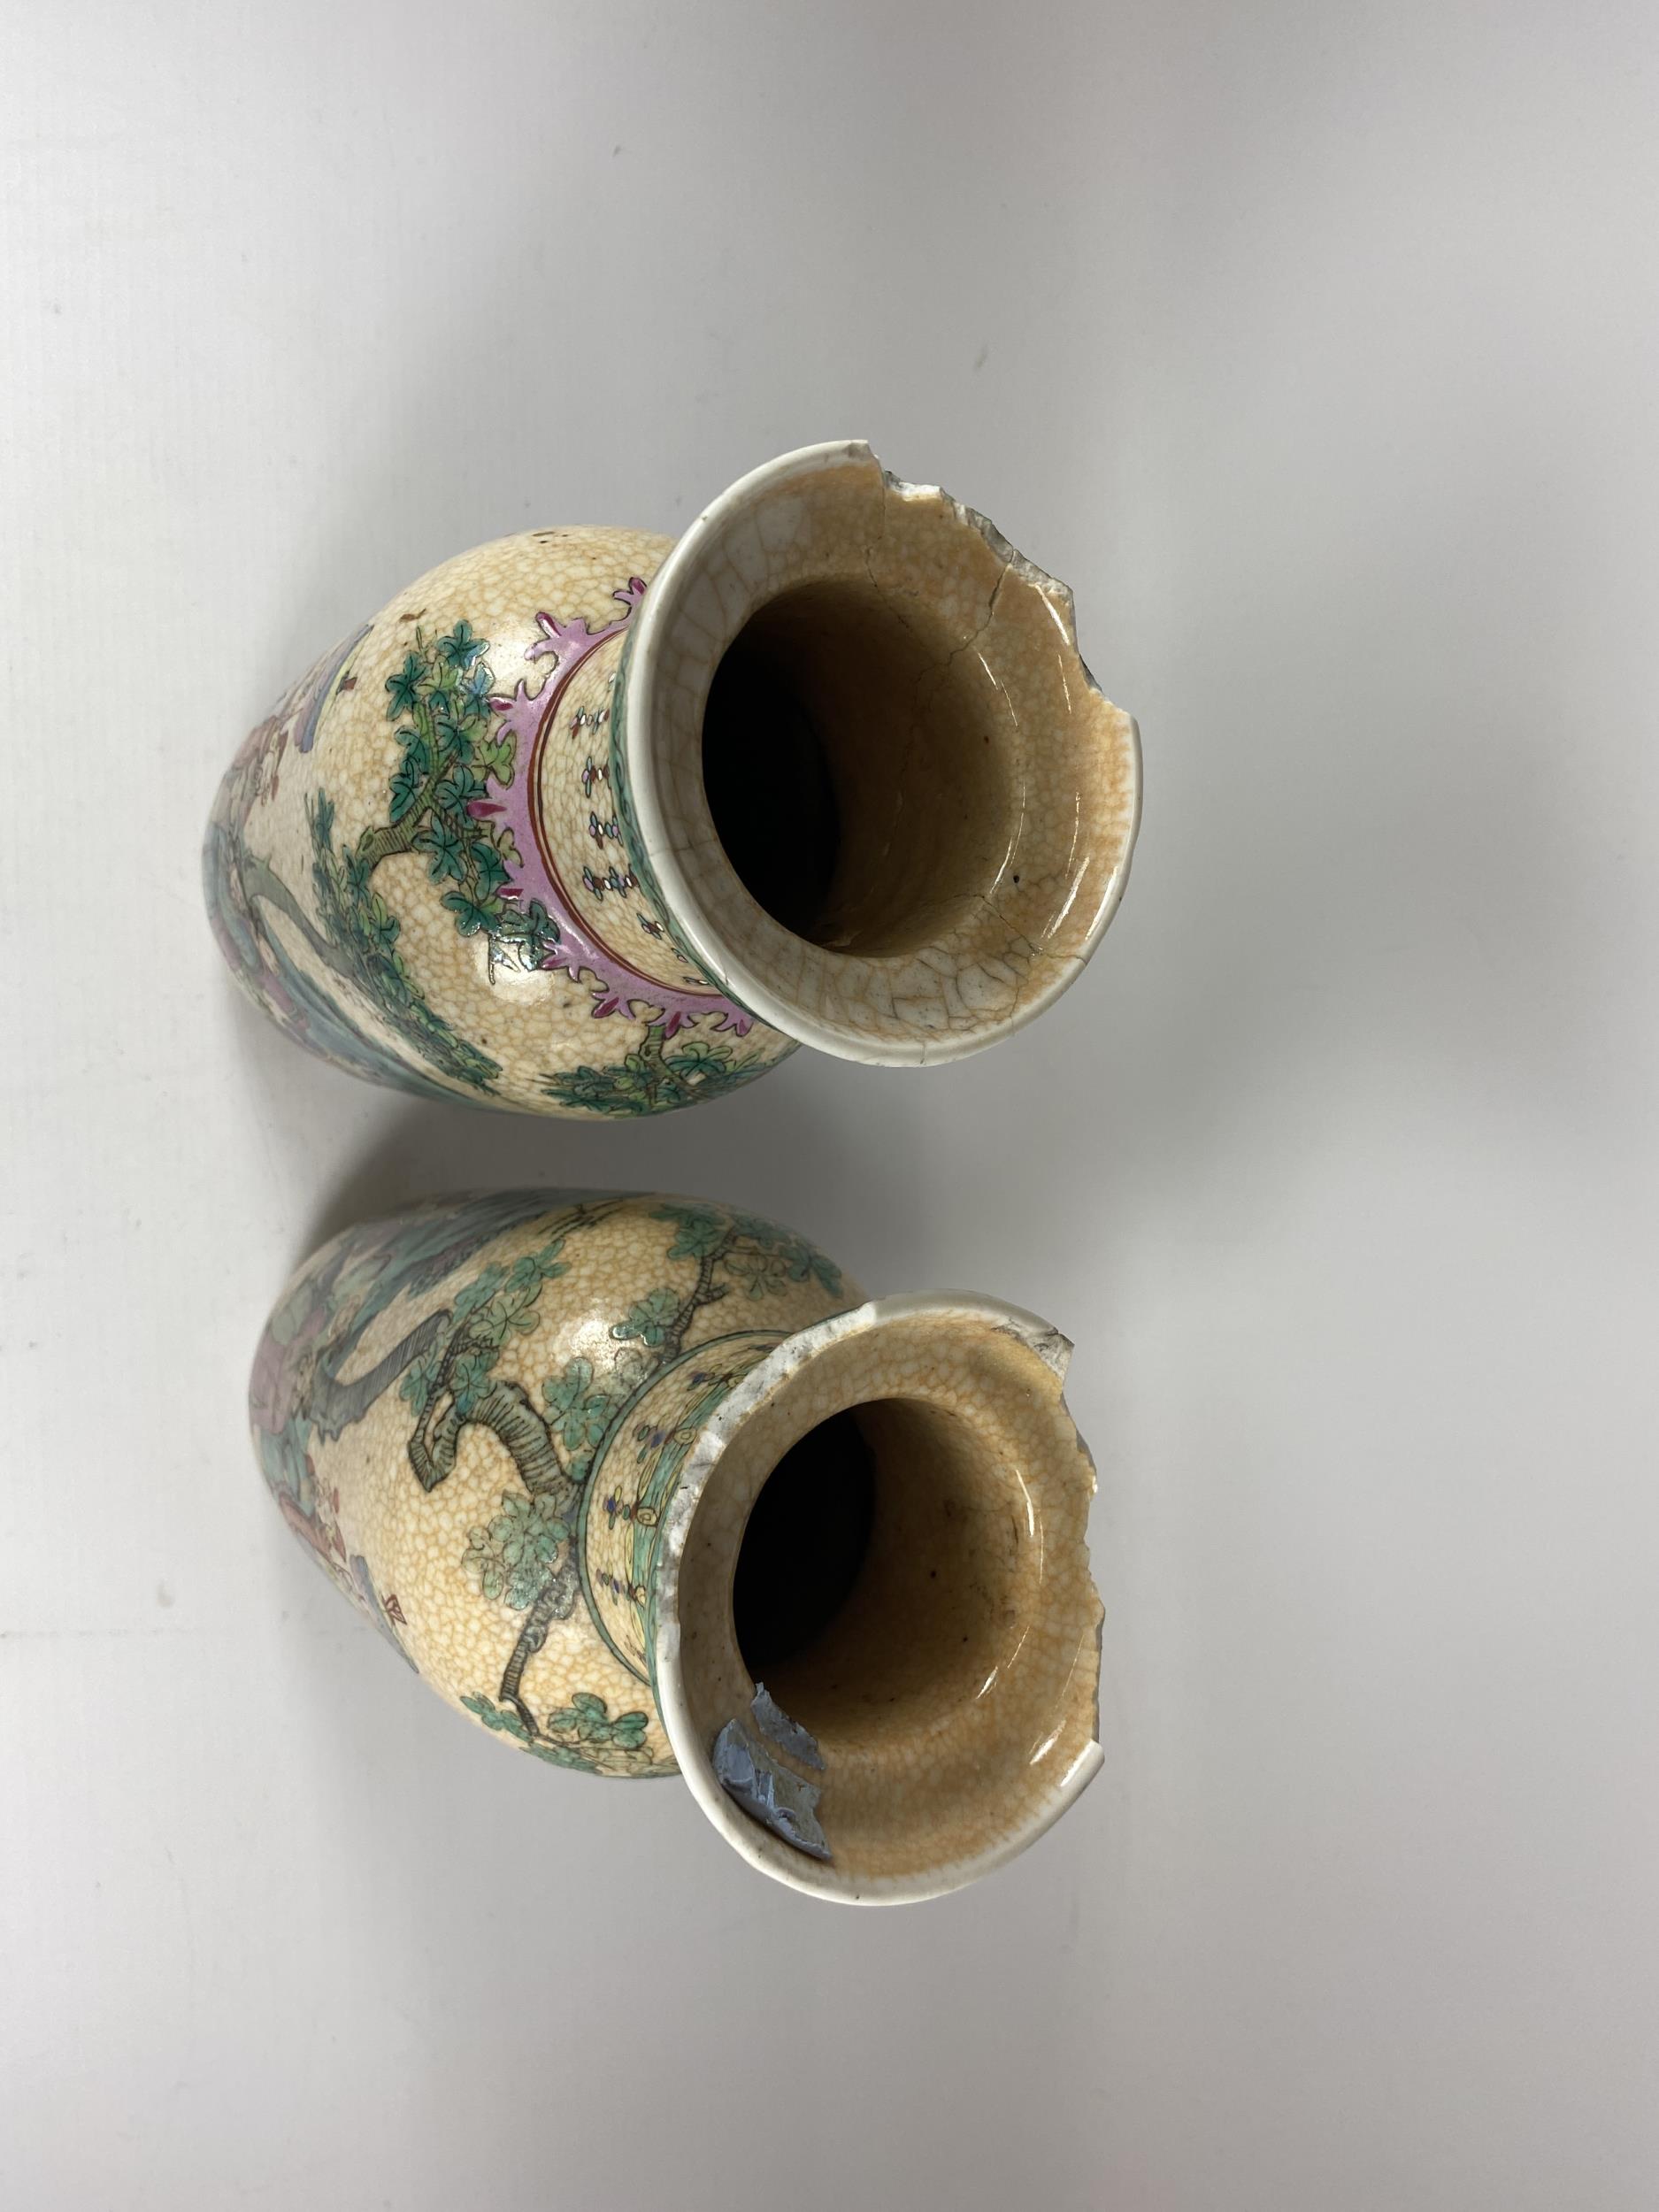 TWO 19TH CENTURY CHINESE CRACKLE GLAZE PORCELAIN WARRIOR DESIGN VASES, HEIGHT 25.5CM (A/F) - Image 2 of 5